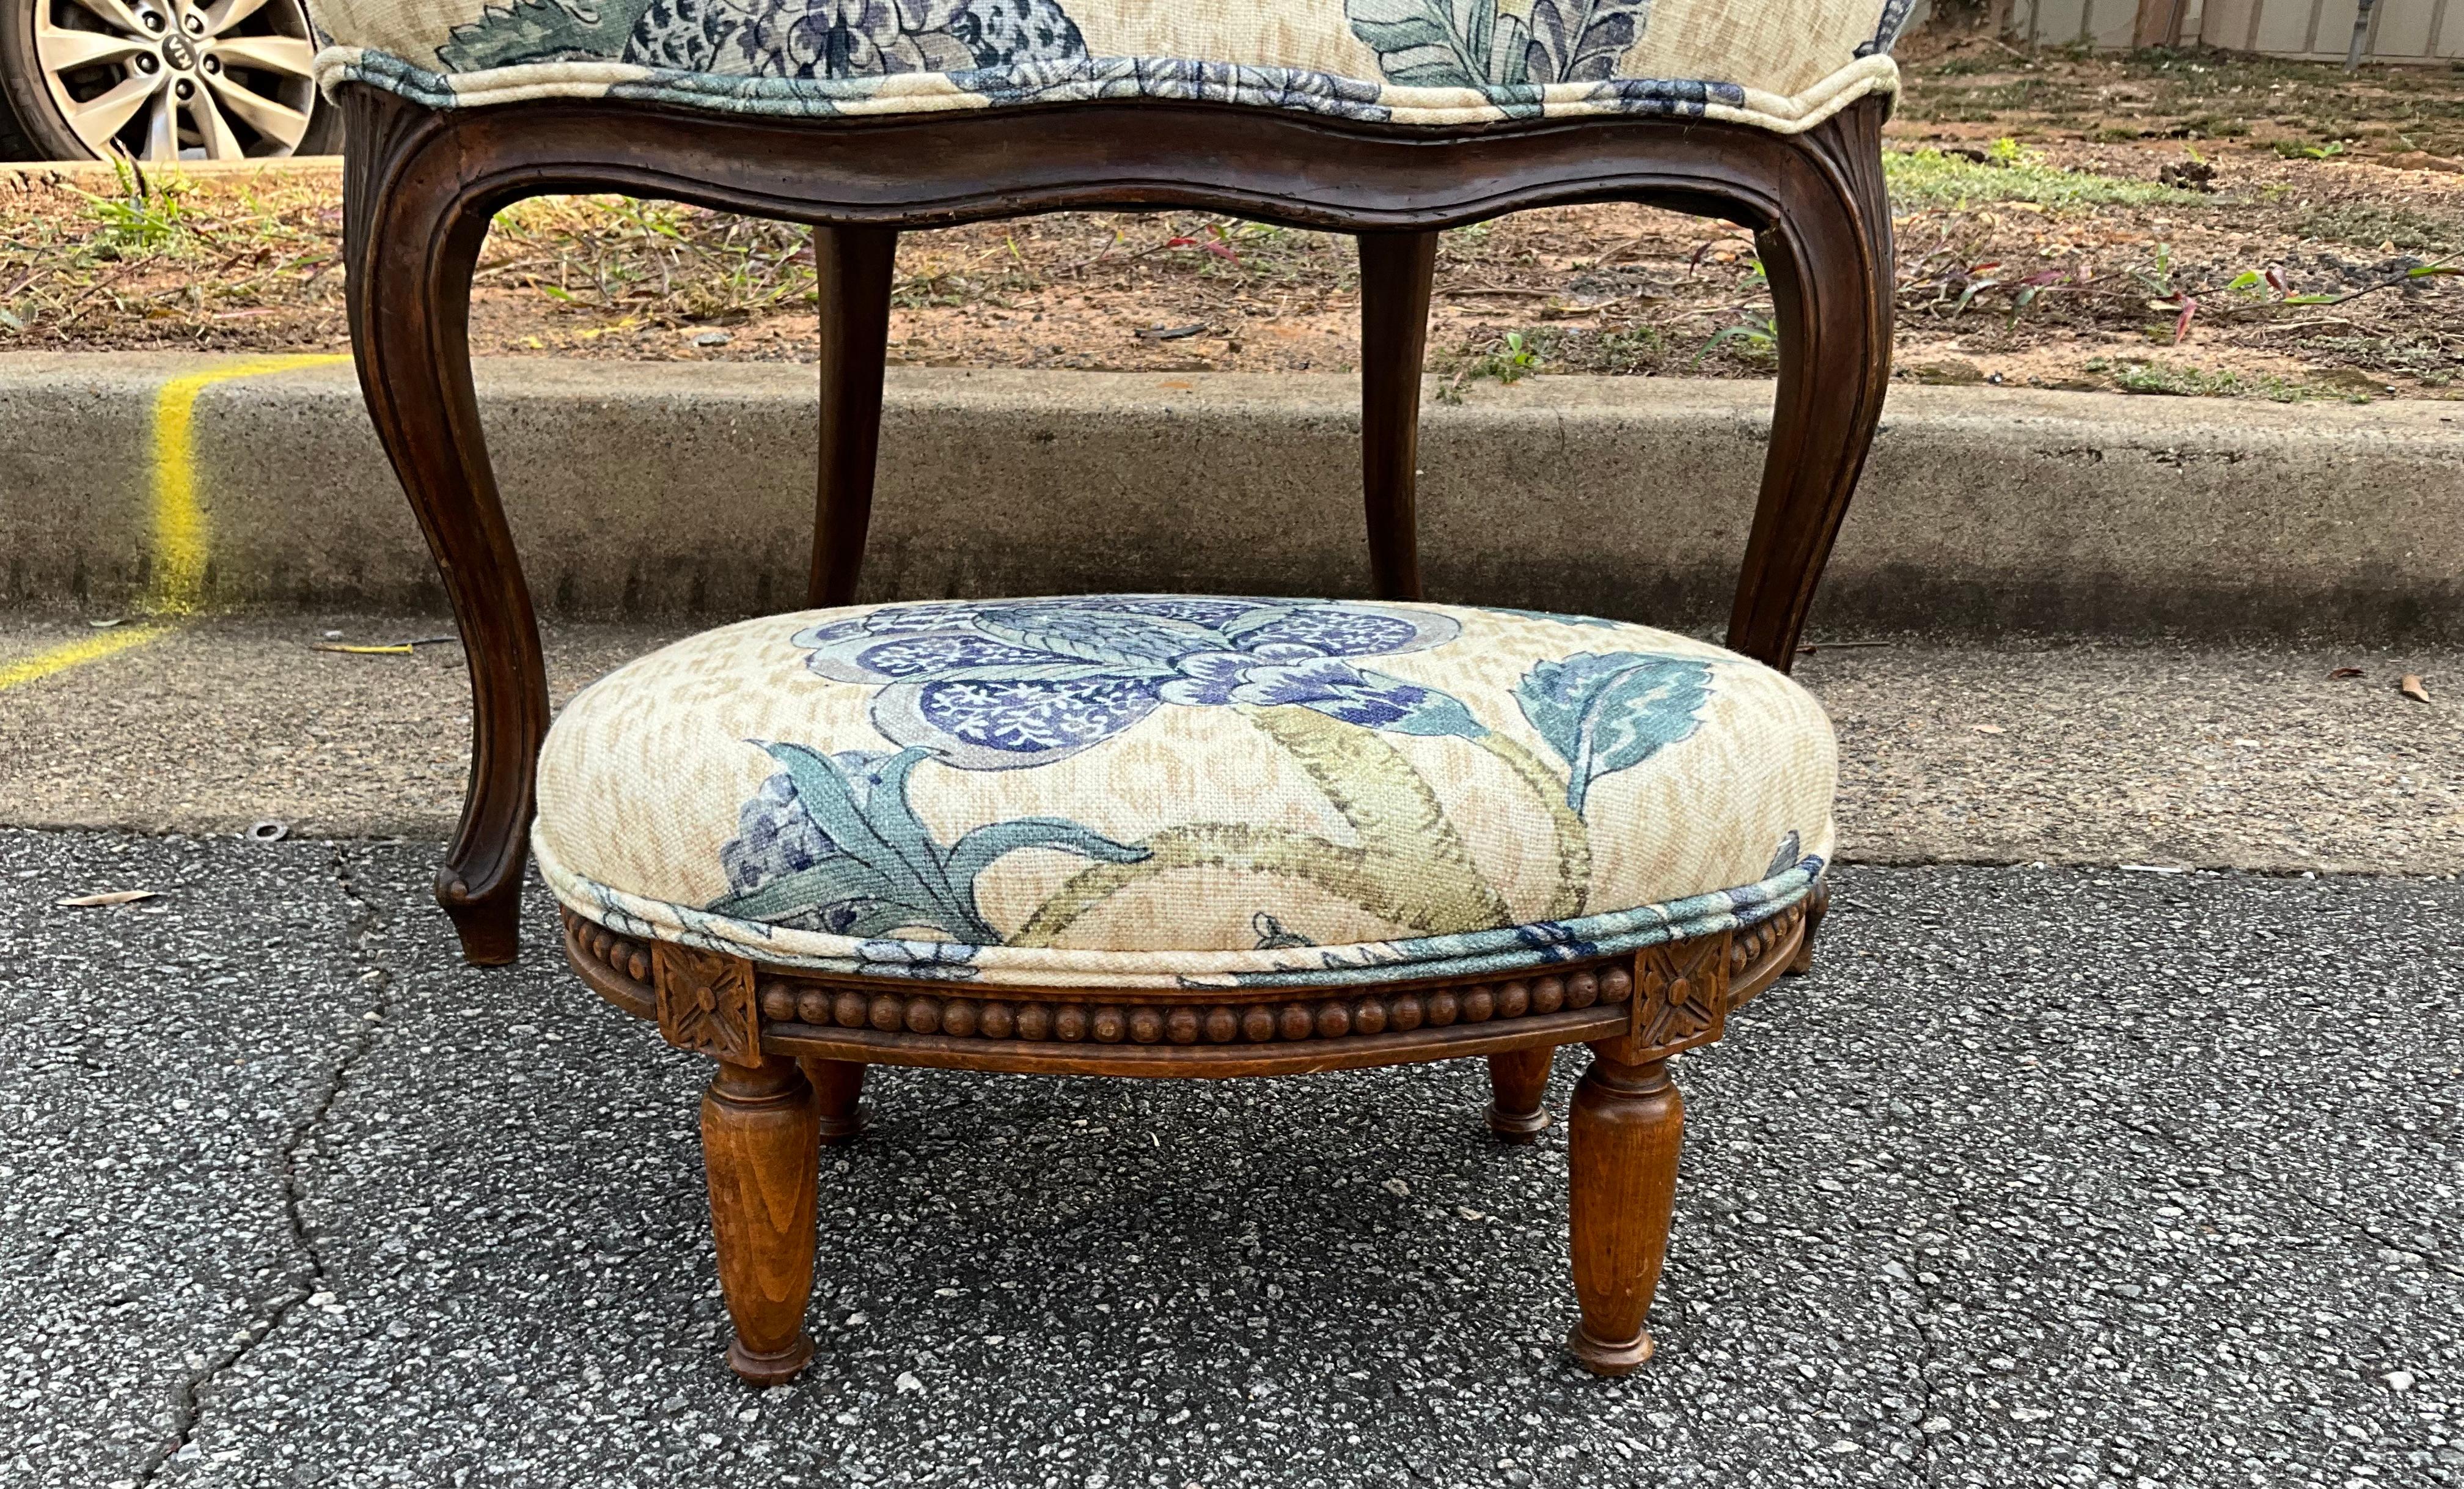 Upholstery Antique French Fruitwood Berger Chair & Ottoman In Blue Floral & Leopard - S/2 For Sale